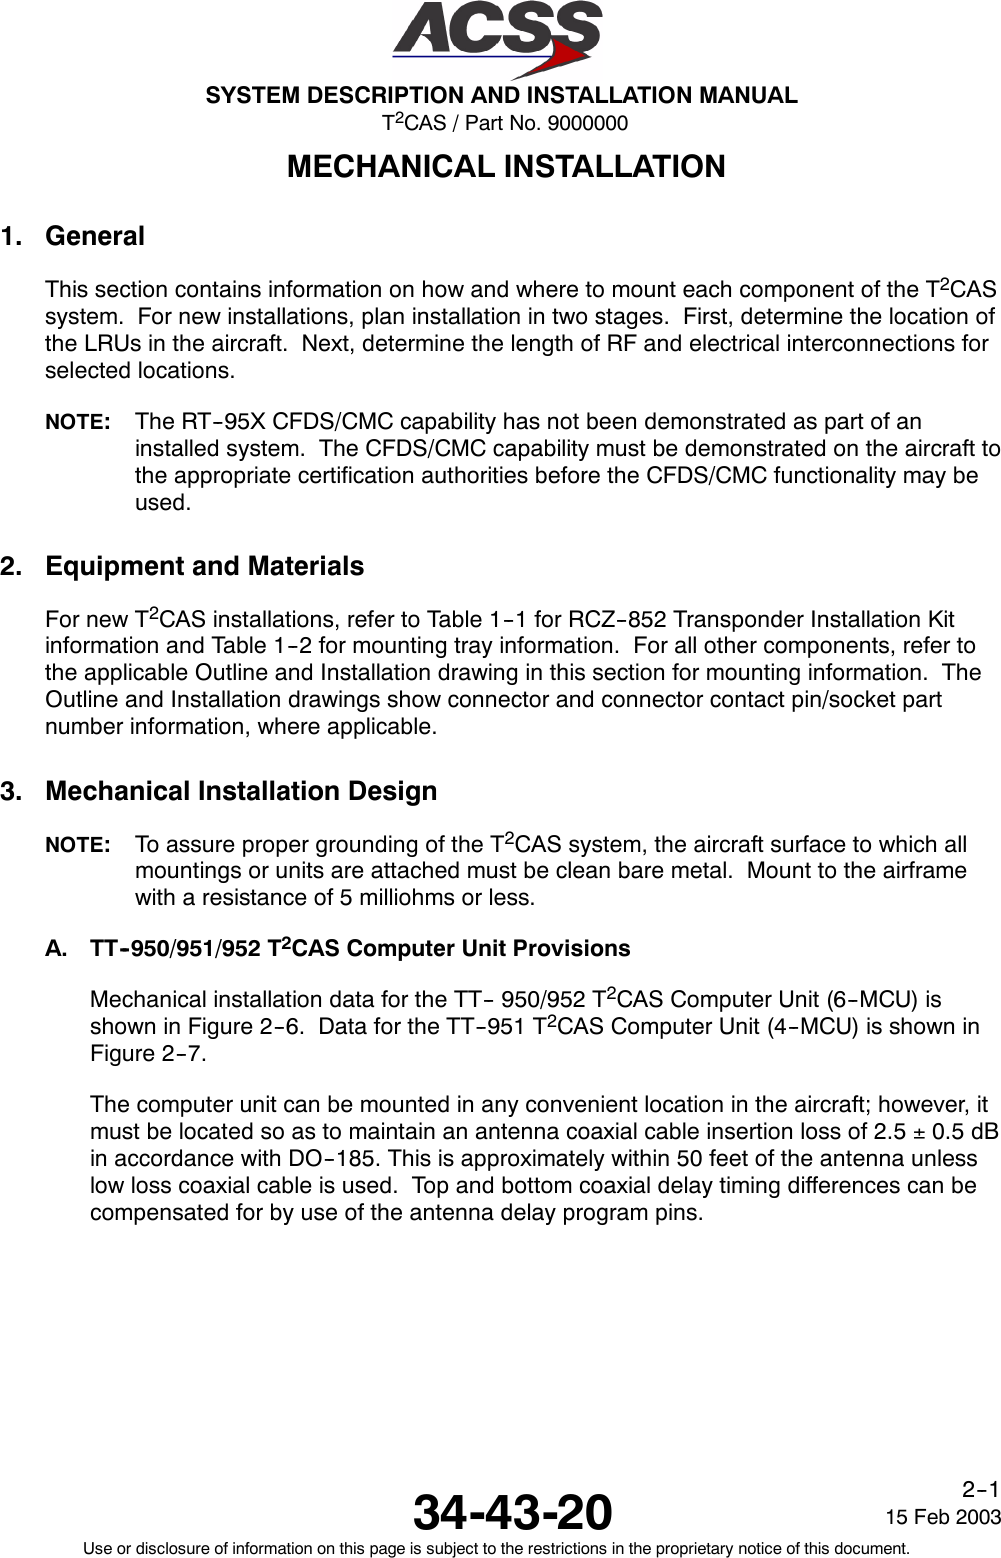 T2CAS / Part No. 9000000SYSTEM DESCRIPTION AND INSTALLATION MANUAL34-43-20 15 Feb 2003Use or disclosure of information on this page is subject to the restrictions in the proprietary notice of this document.2--1MECHANICAL INSTALLATION1. GeneralThis section contains information on how and where to mount each component of the T2CASsystem. For new installations, plan installation in two stages. First, determine the location ofthe LRUs in the aircraft. Next, determine the length of RF and electrical interconnections forselected locations.NOTE:The RT--95X CFDS/CMC capability has not been demonstrated as part of aninstalled system. The CFDS/CMC capability must be demonstrated on the aircraft tothe appropriate certification authorities before the CFDS/CMC functionality may beused.2. Equipment and MaterialsFor new T2CAS installations, refer to Table 1--1 for RCZ--852 Transponder Installation Kitinformation and Table 1--2 for mounting tray information. For all other components, refer tothe applicable Outline and Installation drawing in this section for mounting information. TheOutline and Installation drawings show connector and connector contact pin/socket partnumber information, where applicable.3. Mechanical Installation DesignNOTE:To assure proper grounding of the T2CAS system, the aircraft surface to which allmountings or units are attached must be clean bare metal. Mount to the airframewith a resistance of 5 milliohms or less.A. TT--950/951/952 T2CAS Computer Unit ProvisionsMechanical installation data for the TT-- 950/952 T2CAS Computer Unit (6--MCU) isshown in Figure 2--6. Data for the TT--951 T2CAS Computer Unit (4--MCU) is shown inFigure 2--7.The computer unit can be mounted in any convenient location in the aircraft; however, itmust be located so as to maintain an antenna coaxial cable insertion loss of 2.5 ±0.5 dBin accordance with DO--185. This is approximately within 50 feet of the antenna unlesslow loss coaxial cable is used. Top and bottom coaxial delay timing differences can becompensated for by use of the antenna delay program pins.